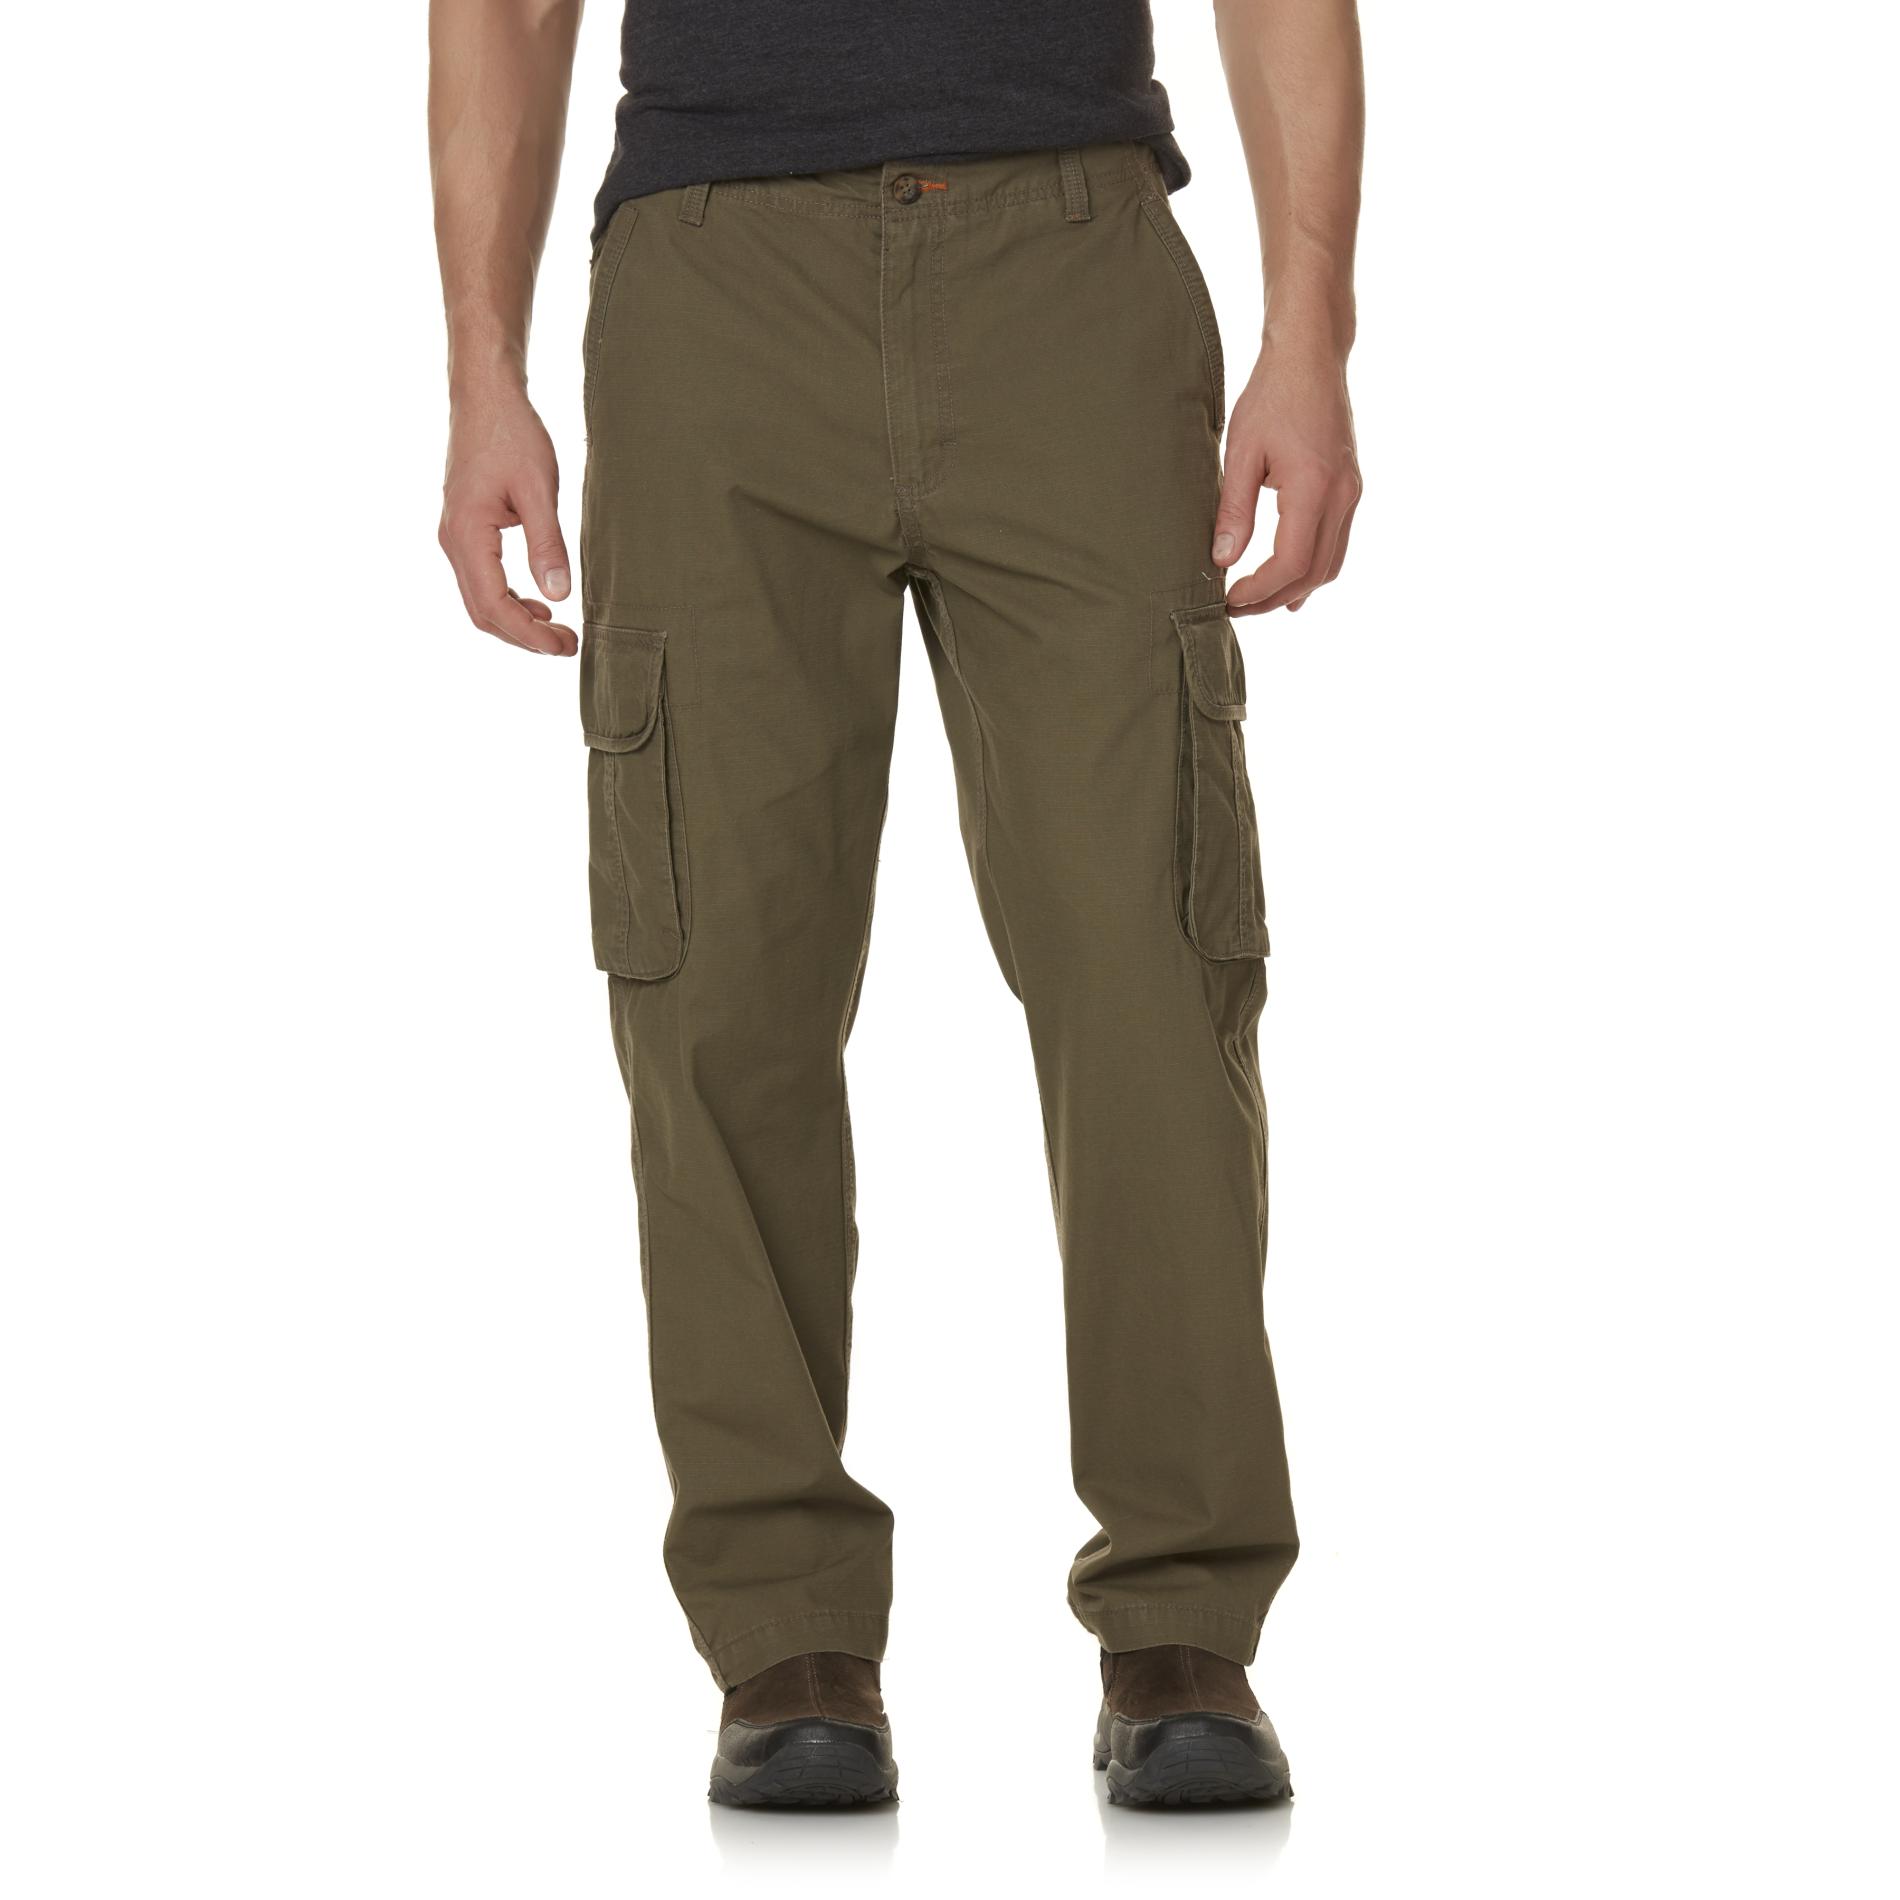 expensive cargo pants